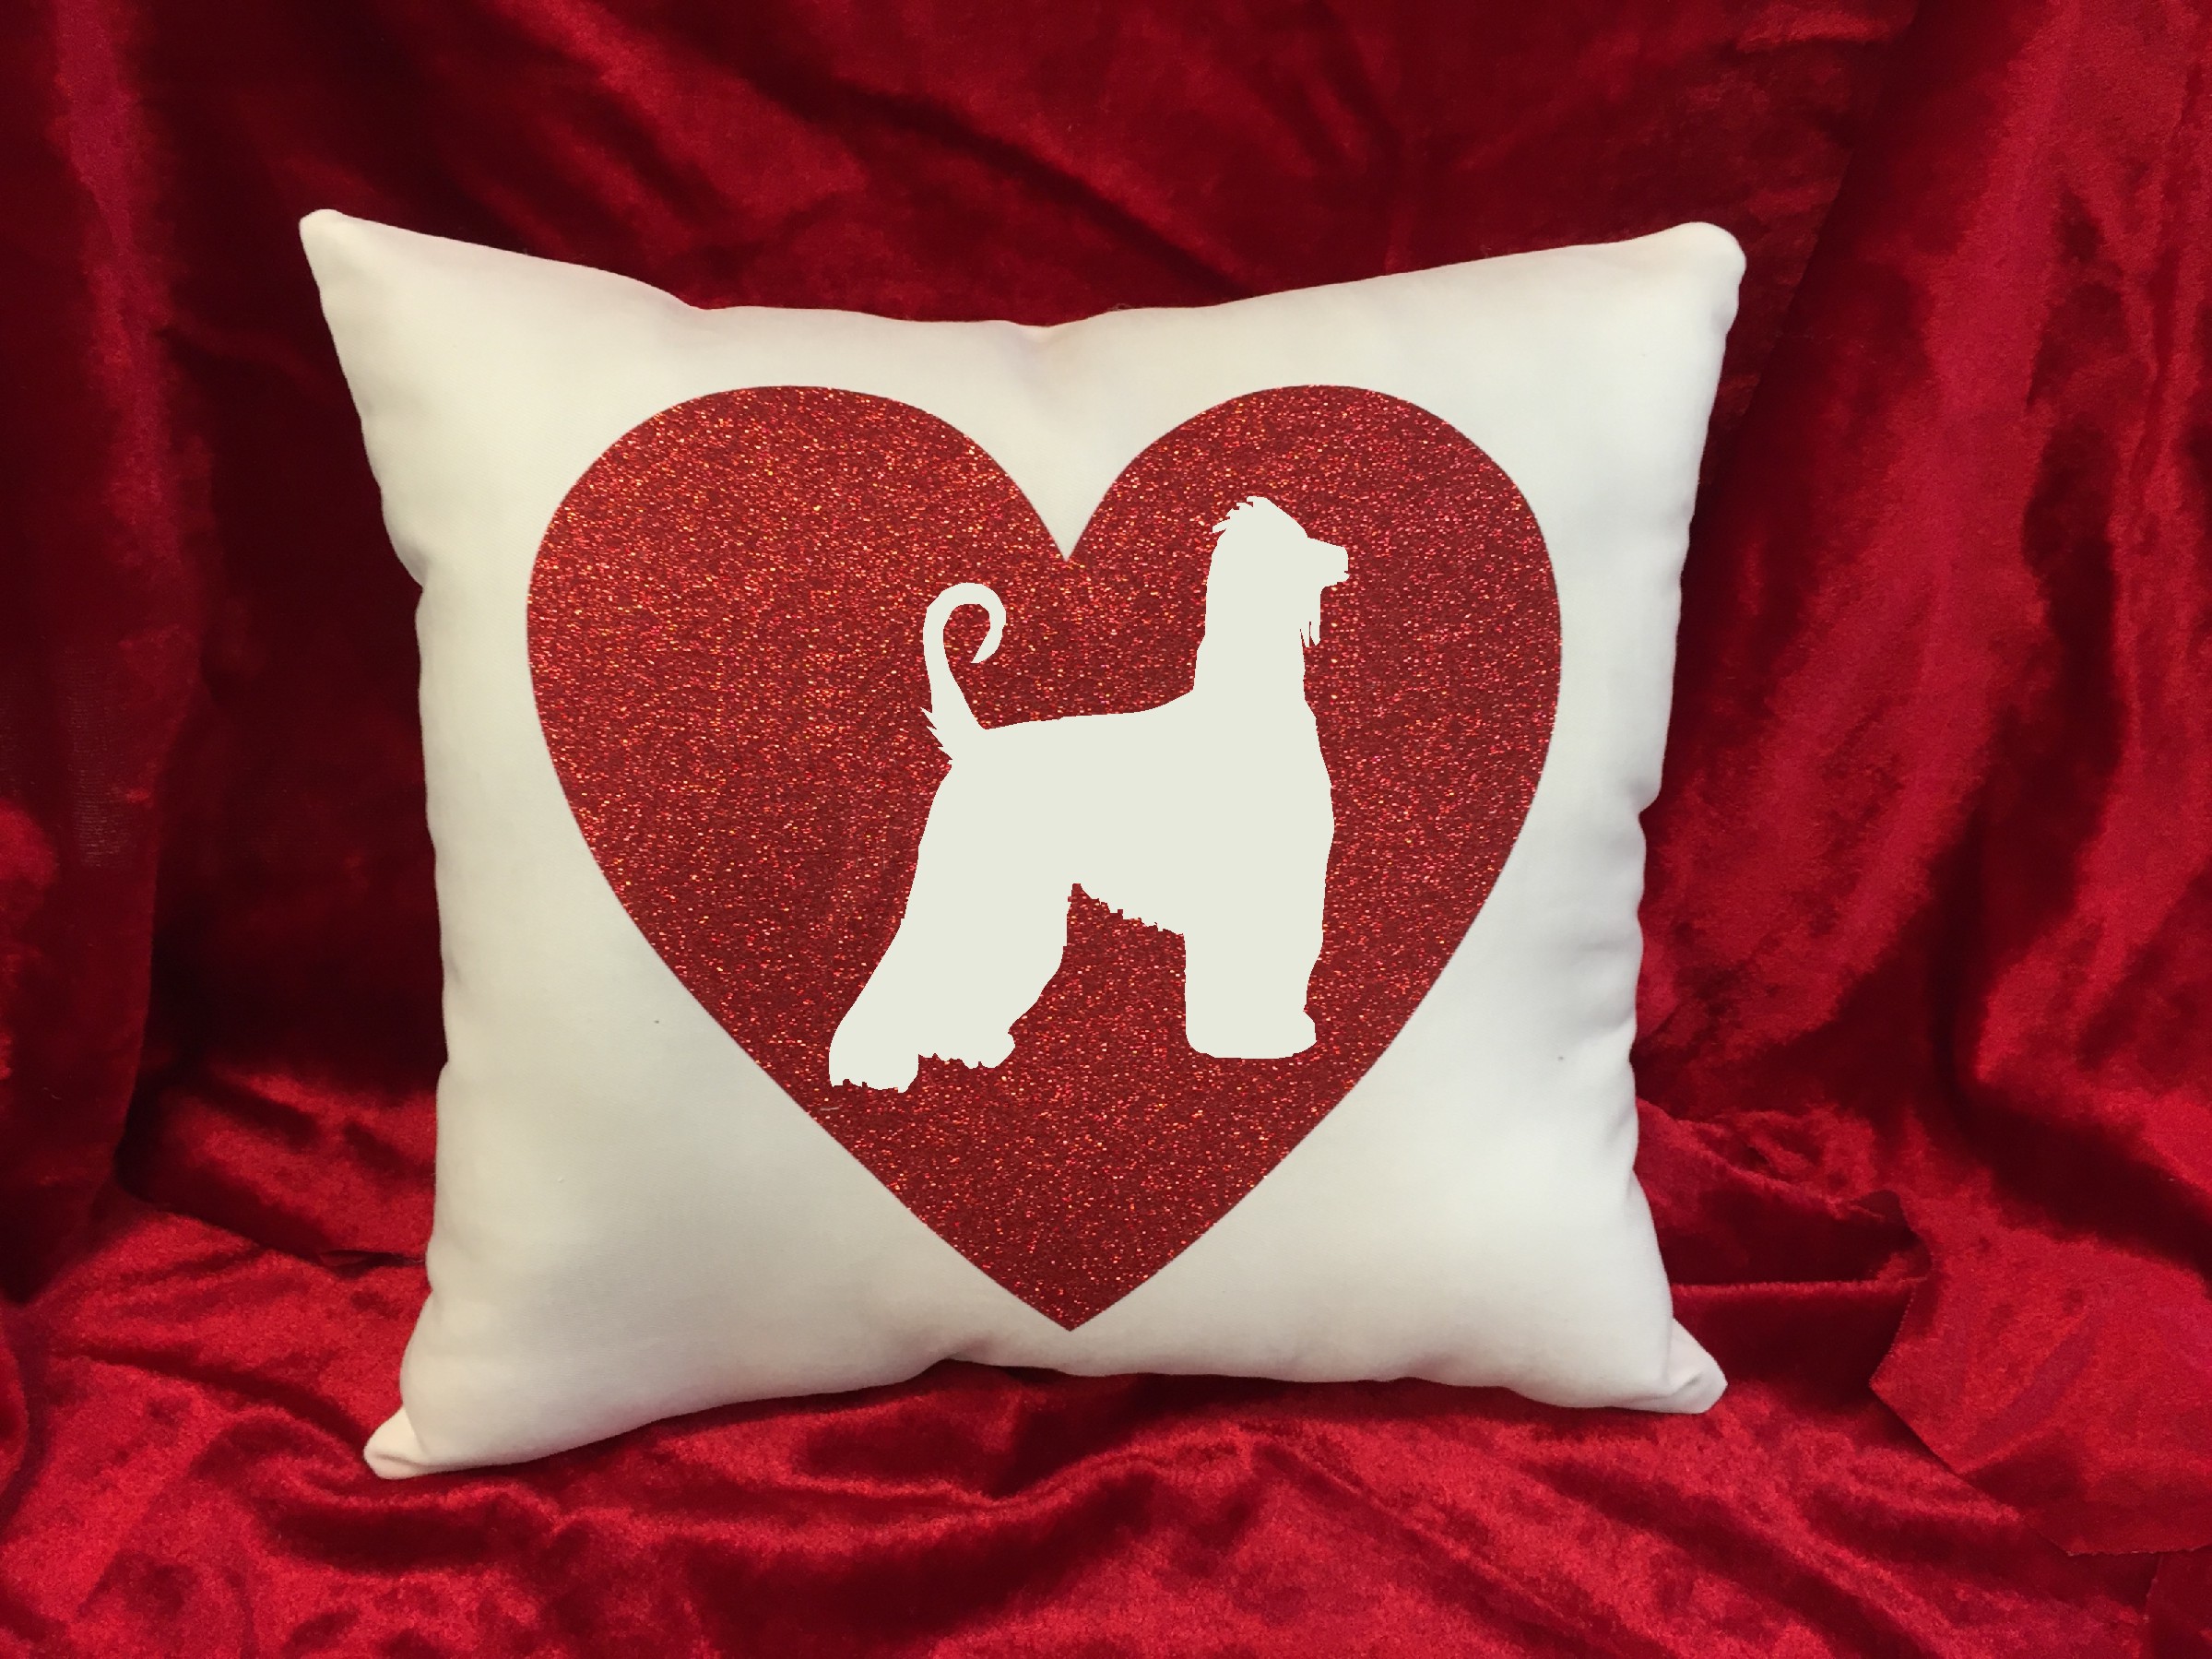 Dogs - Throw Pillow - Afghan Hound